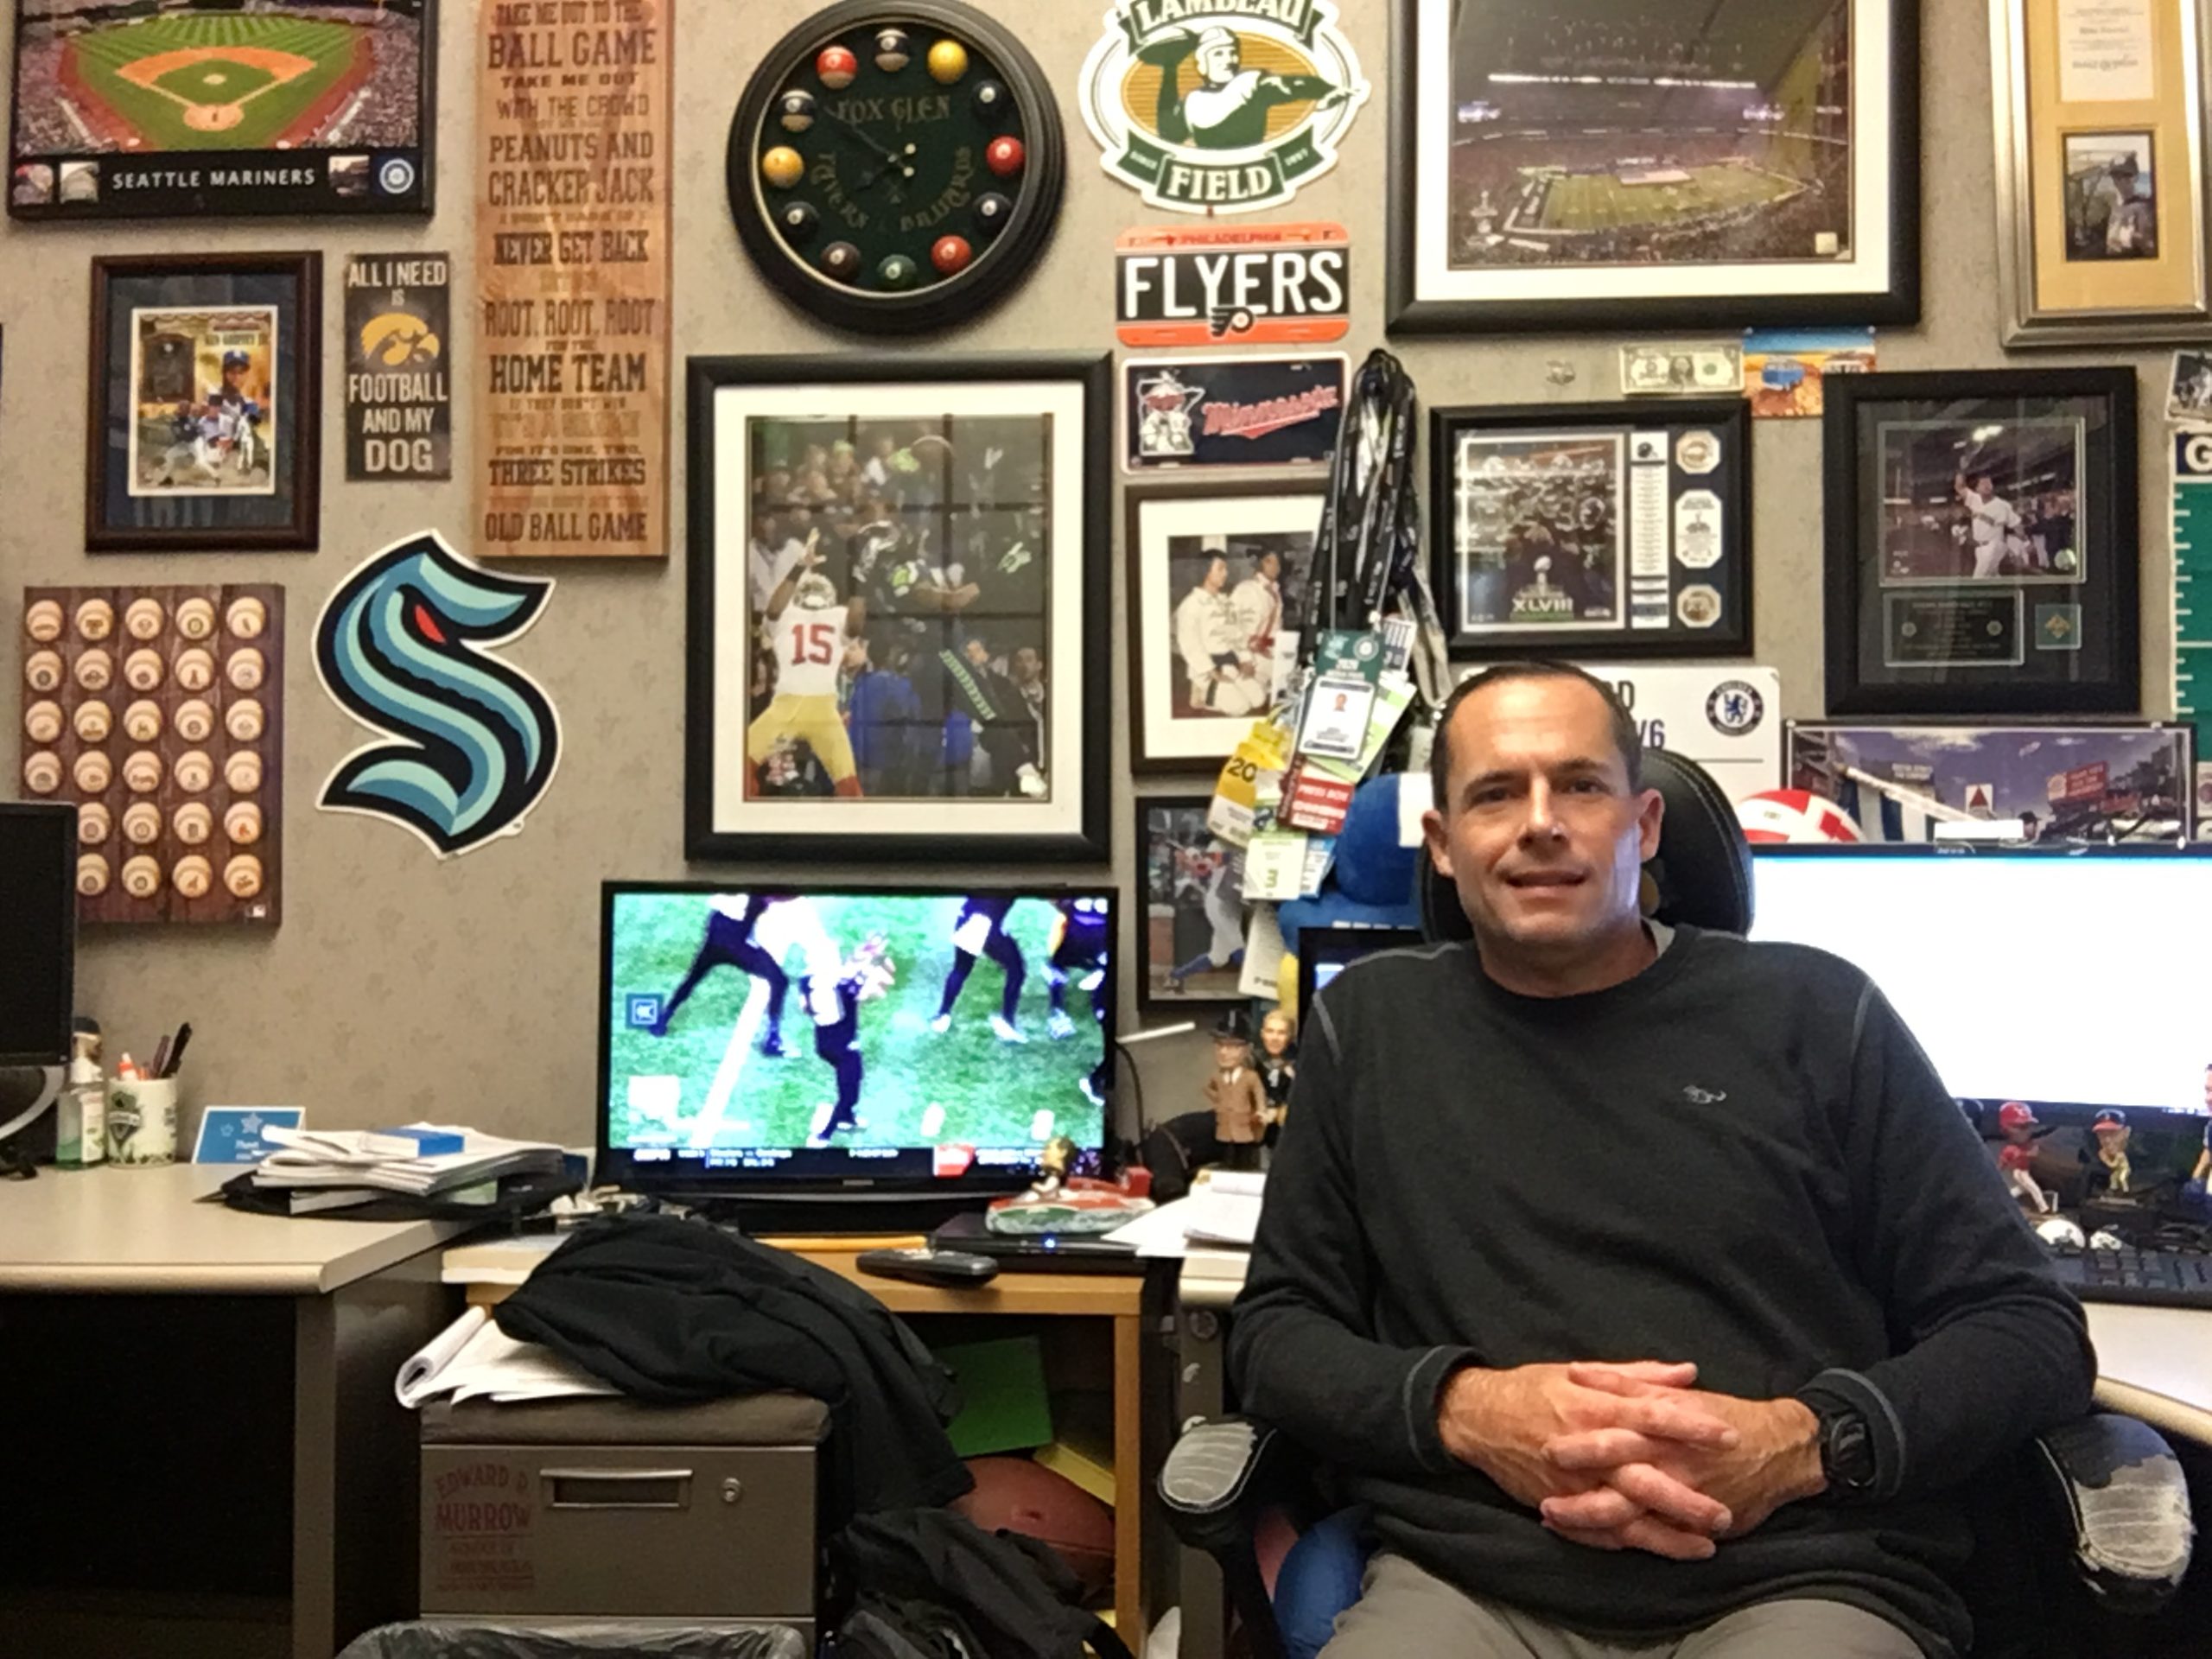 An image of a male seated in front of the camera with a desk set-up behind him surrounded by Seattle sports memorabilia.